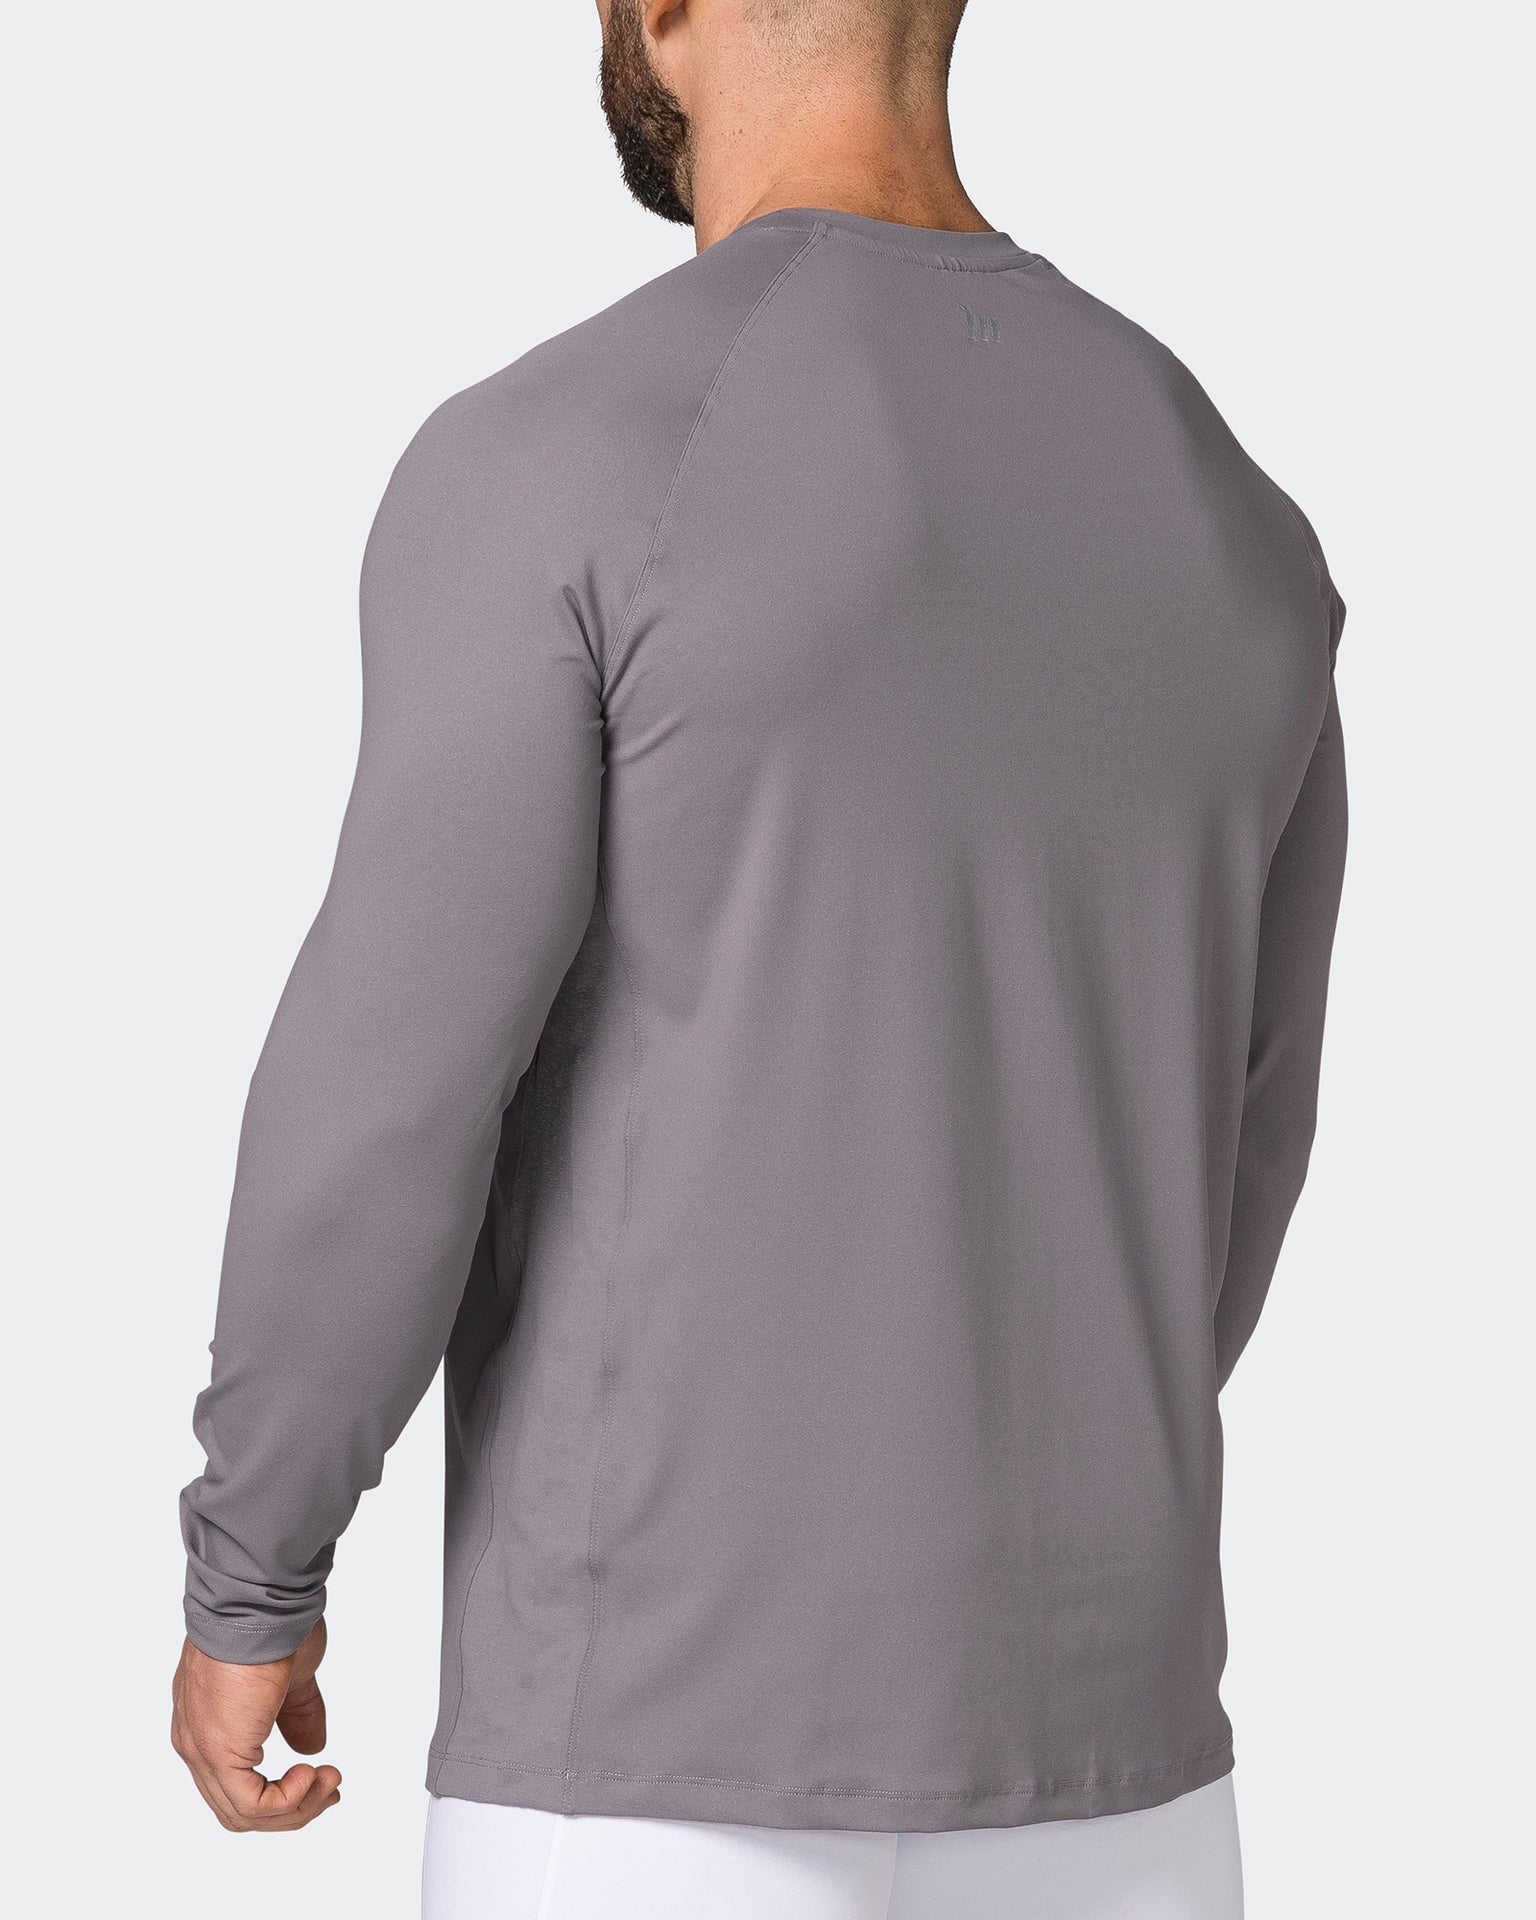 Muscle Nation Tops Reflective Long Sleeve Top - Pearl Grey